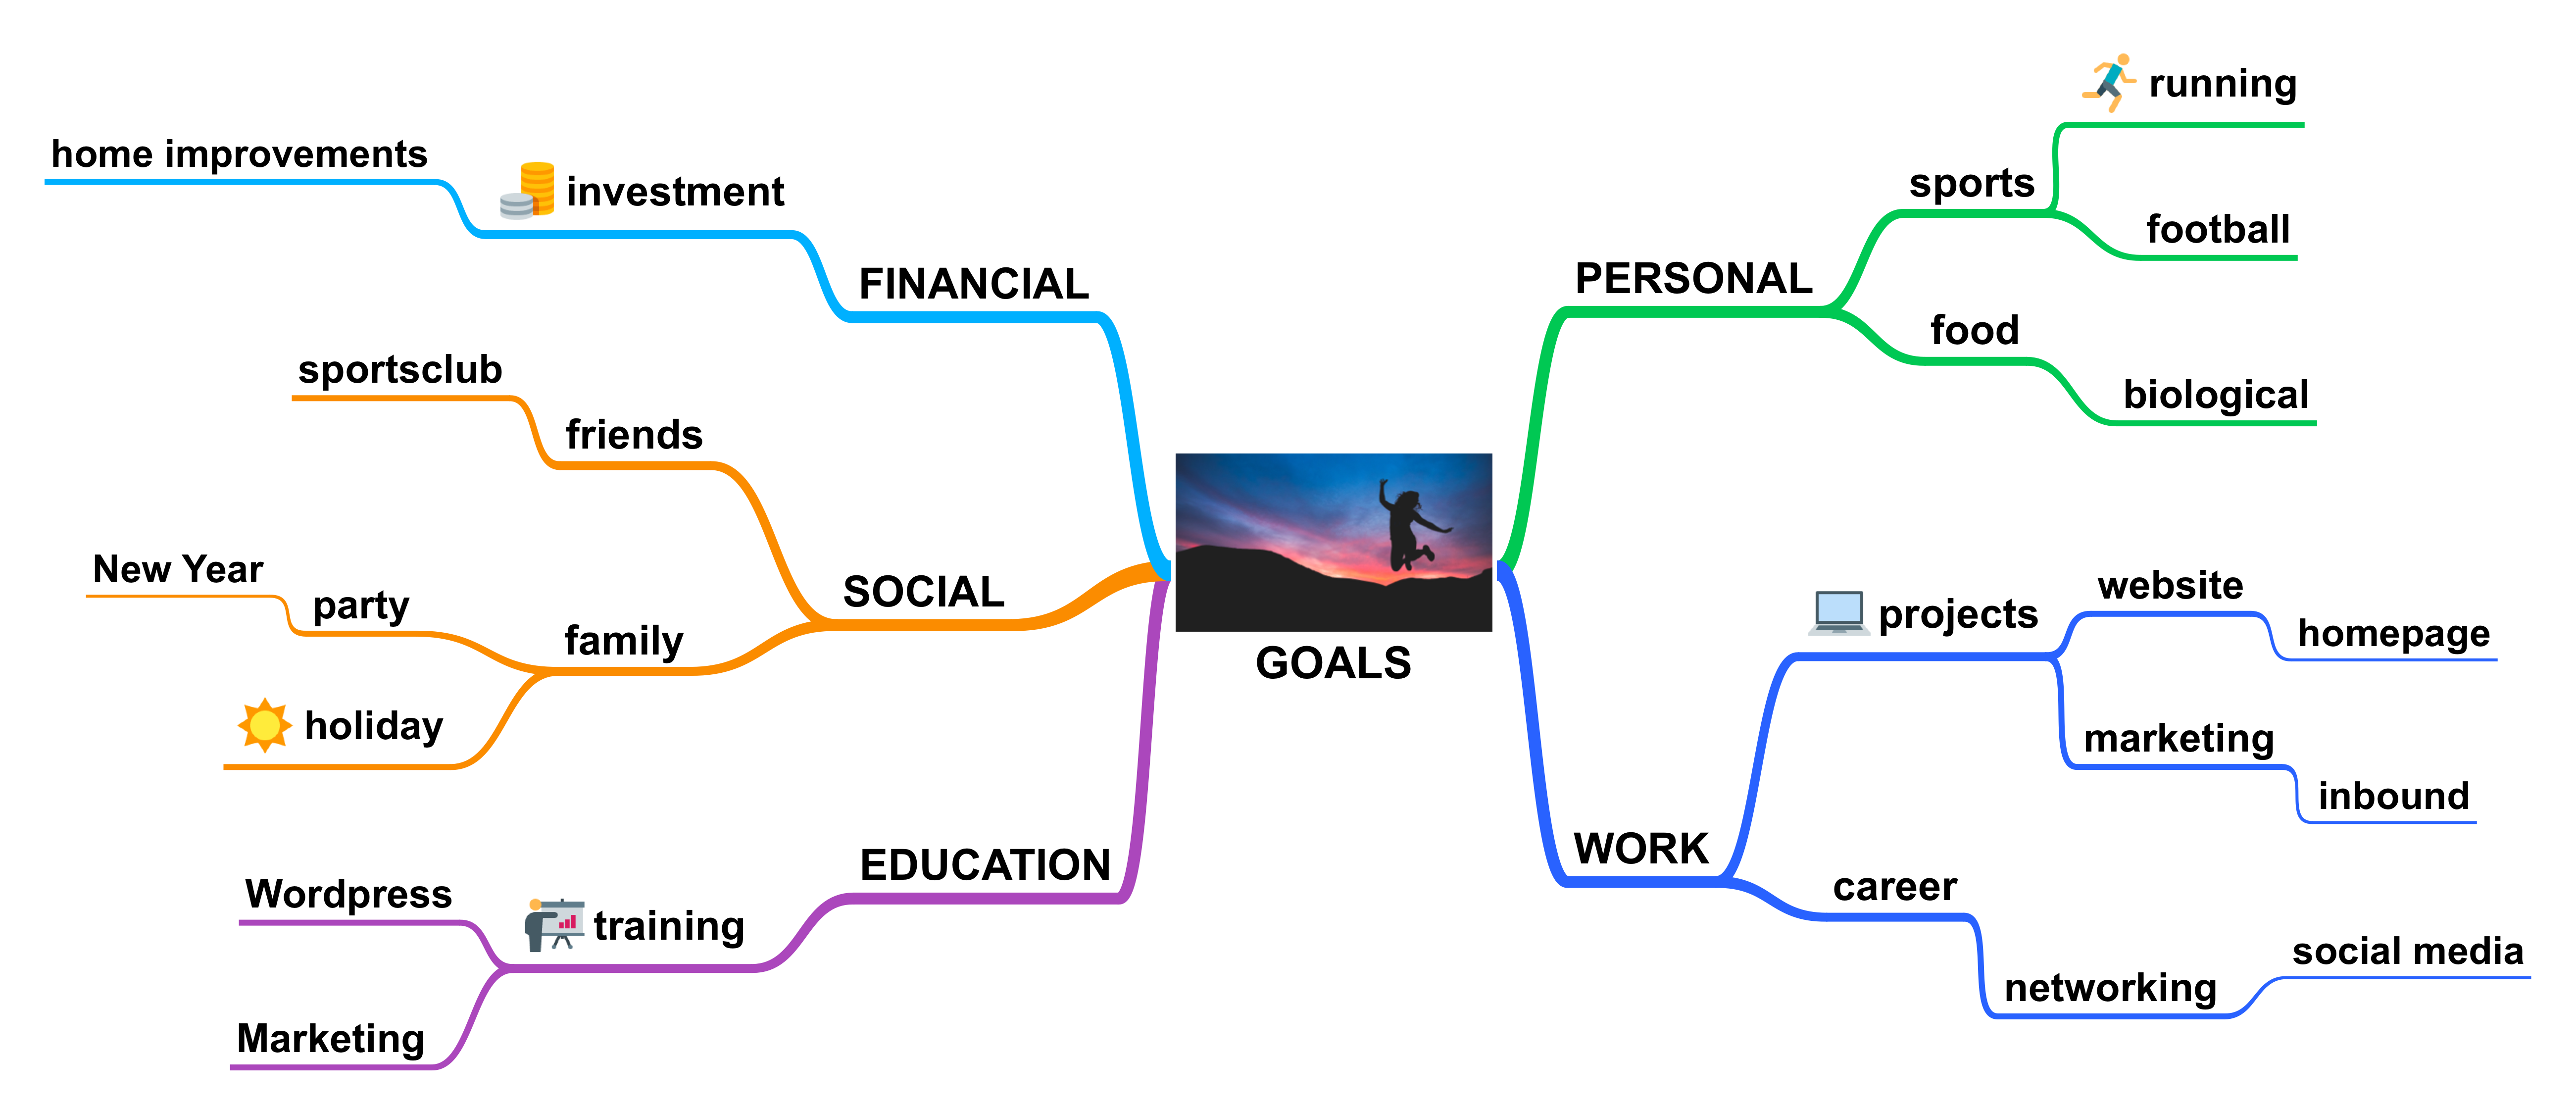 Each different goals has it's own colored tapered line